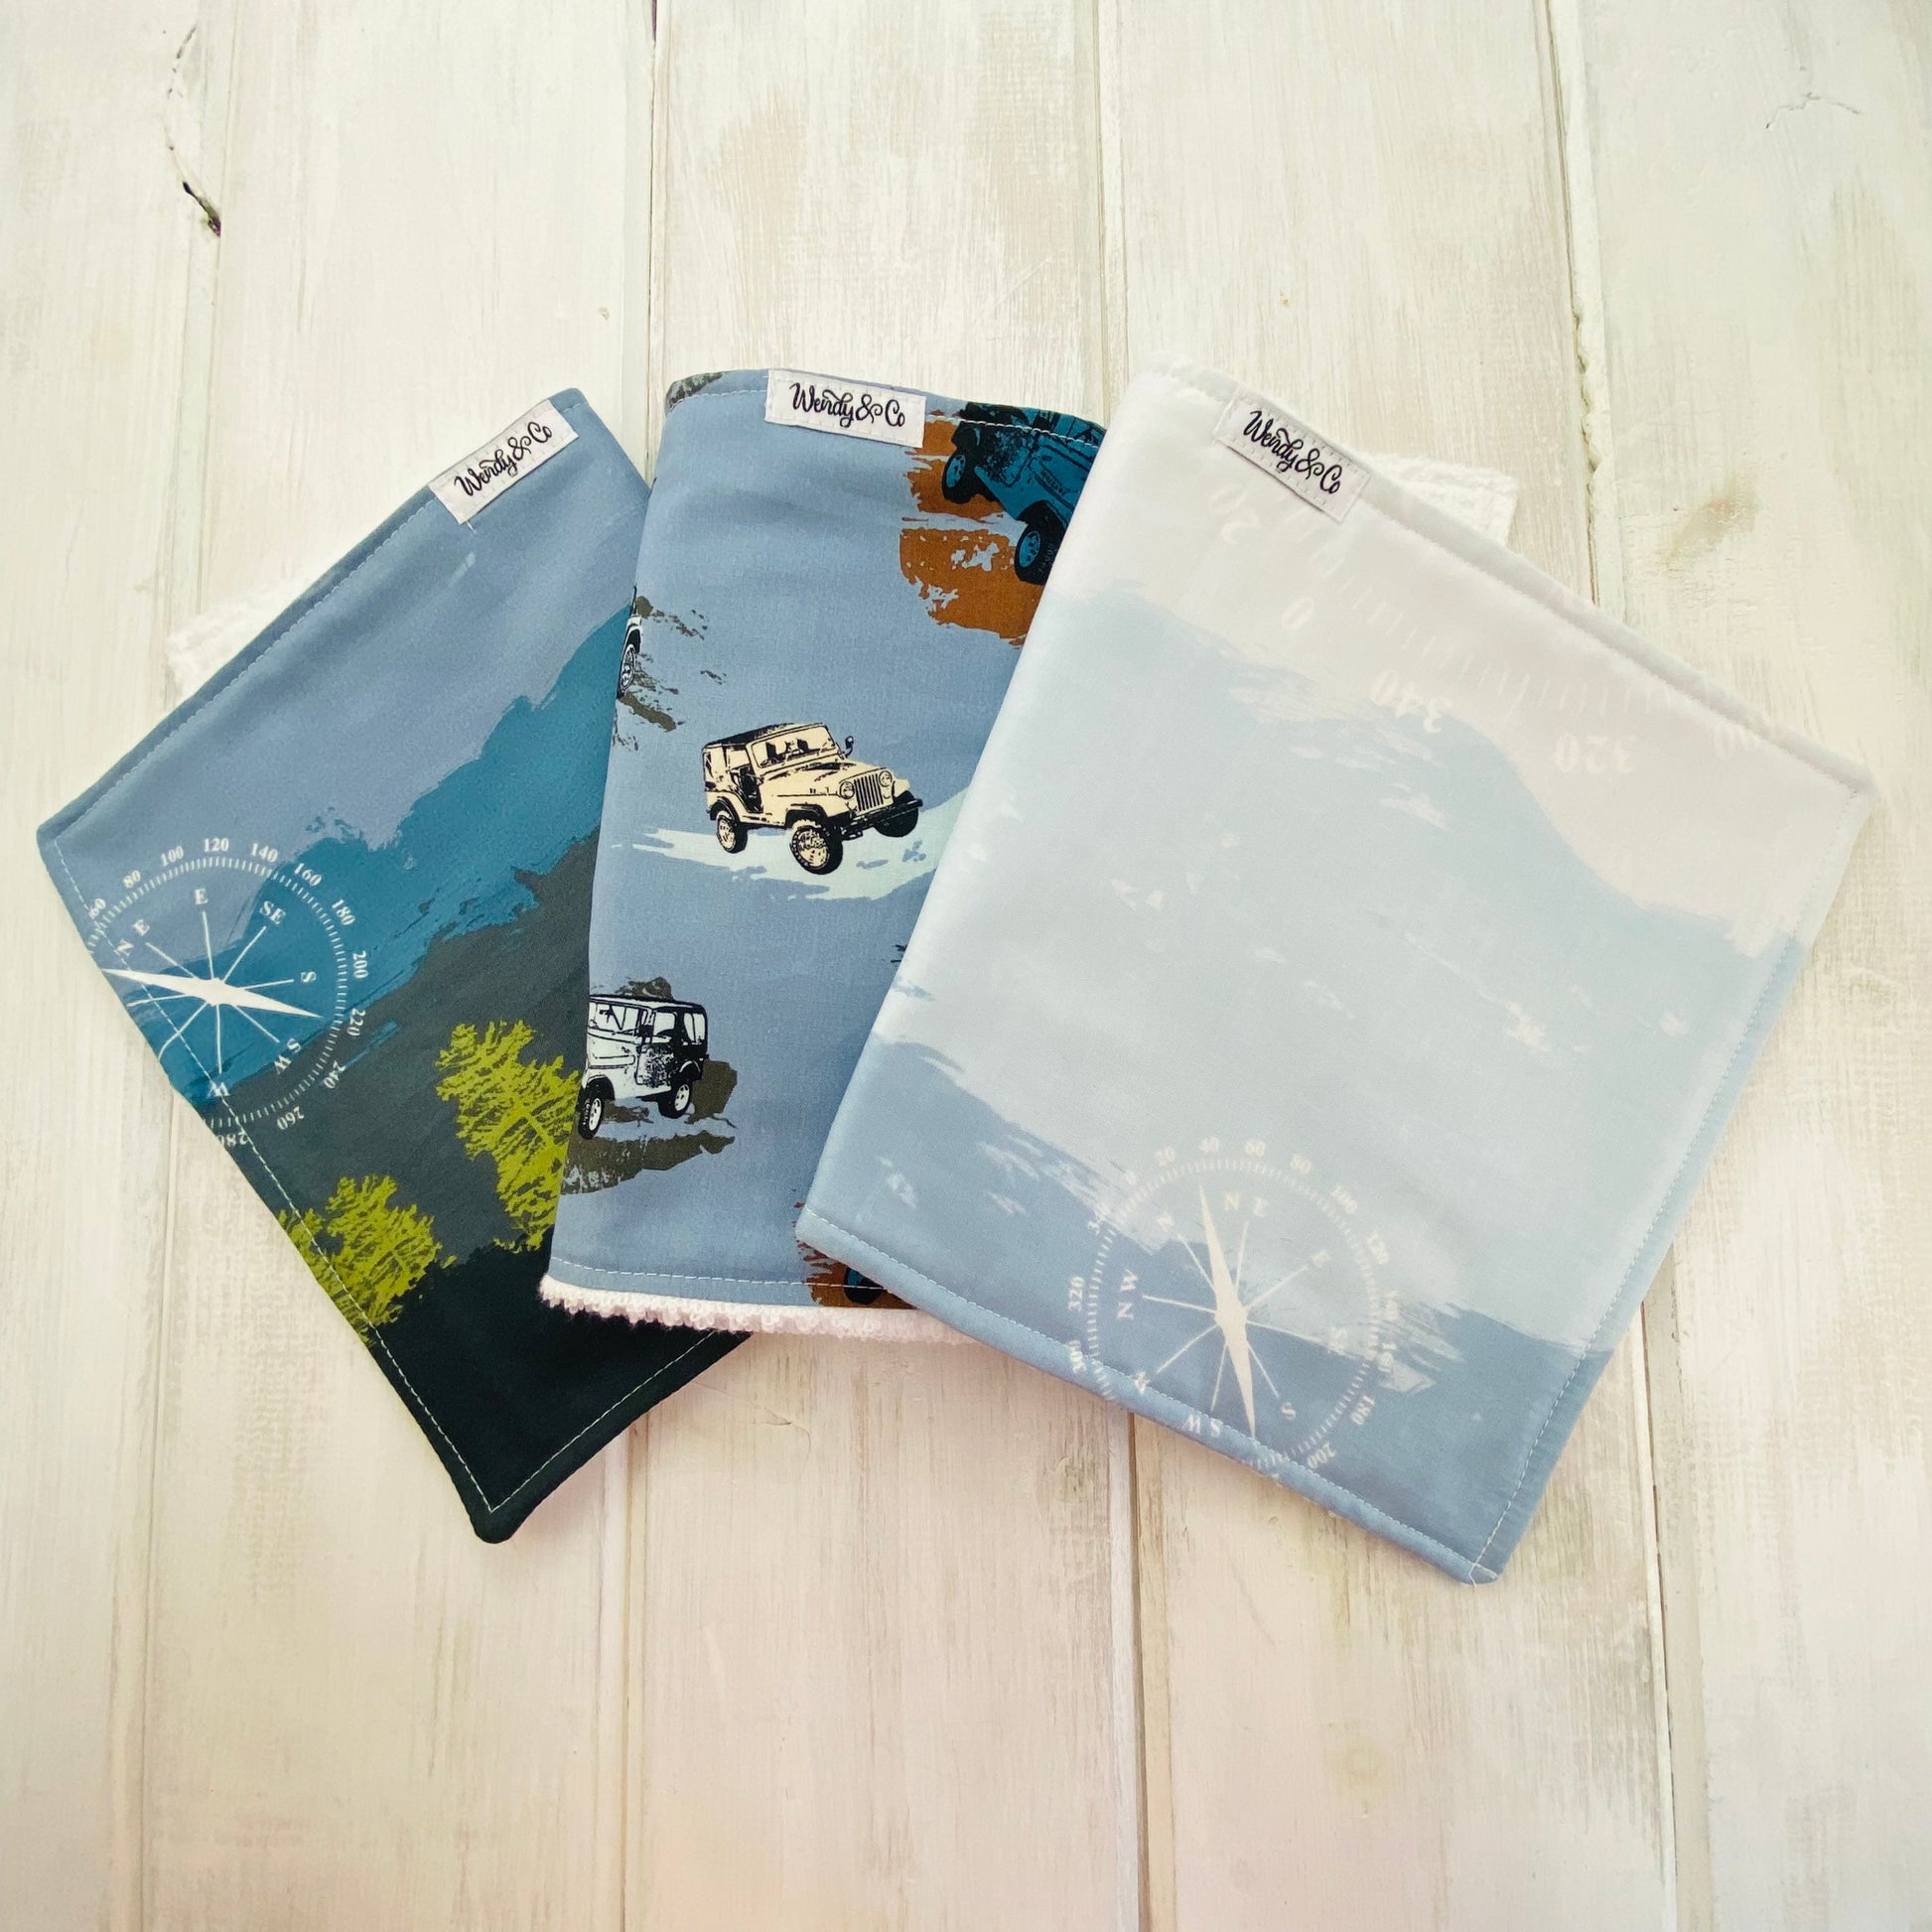 Set of 3 handcrafted baby burp cloth with blue sky scene and jeep scene.